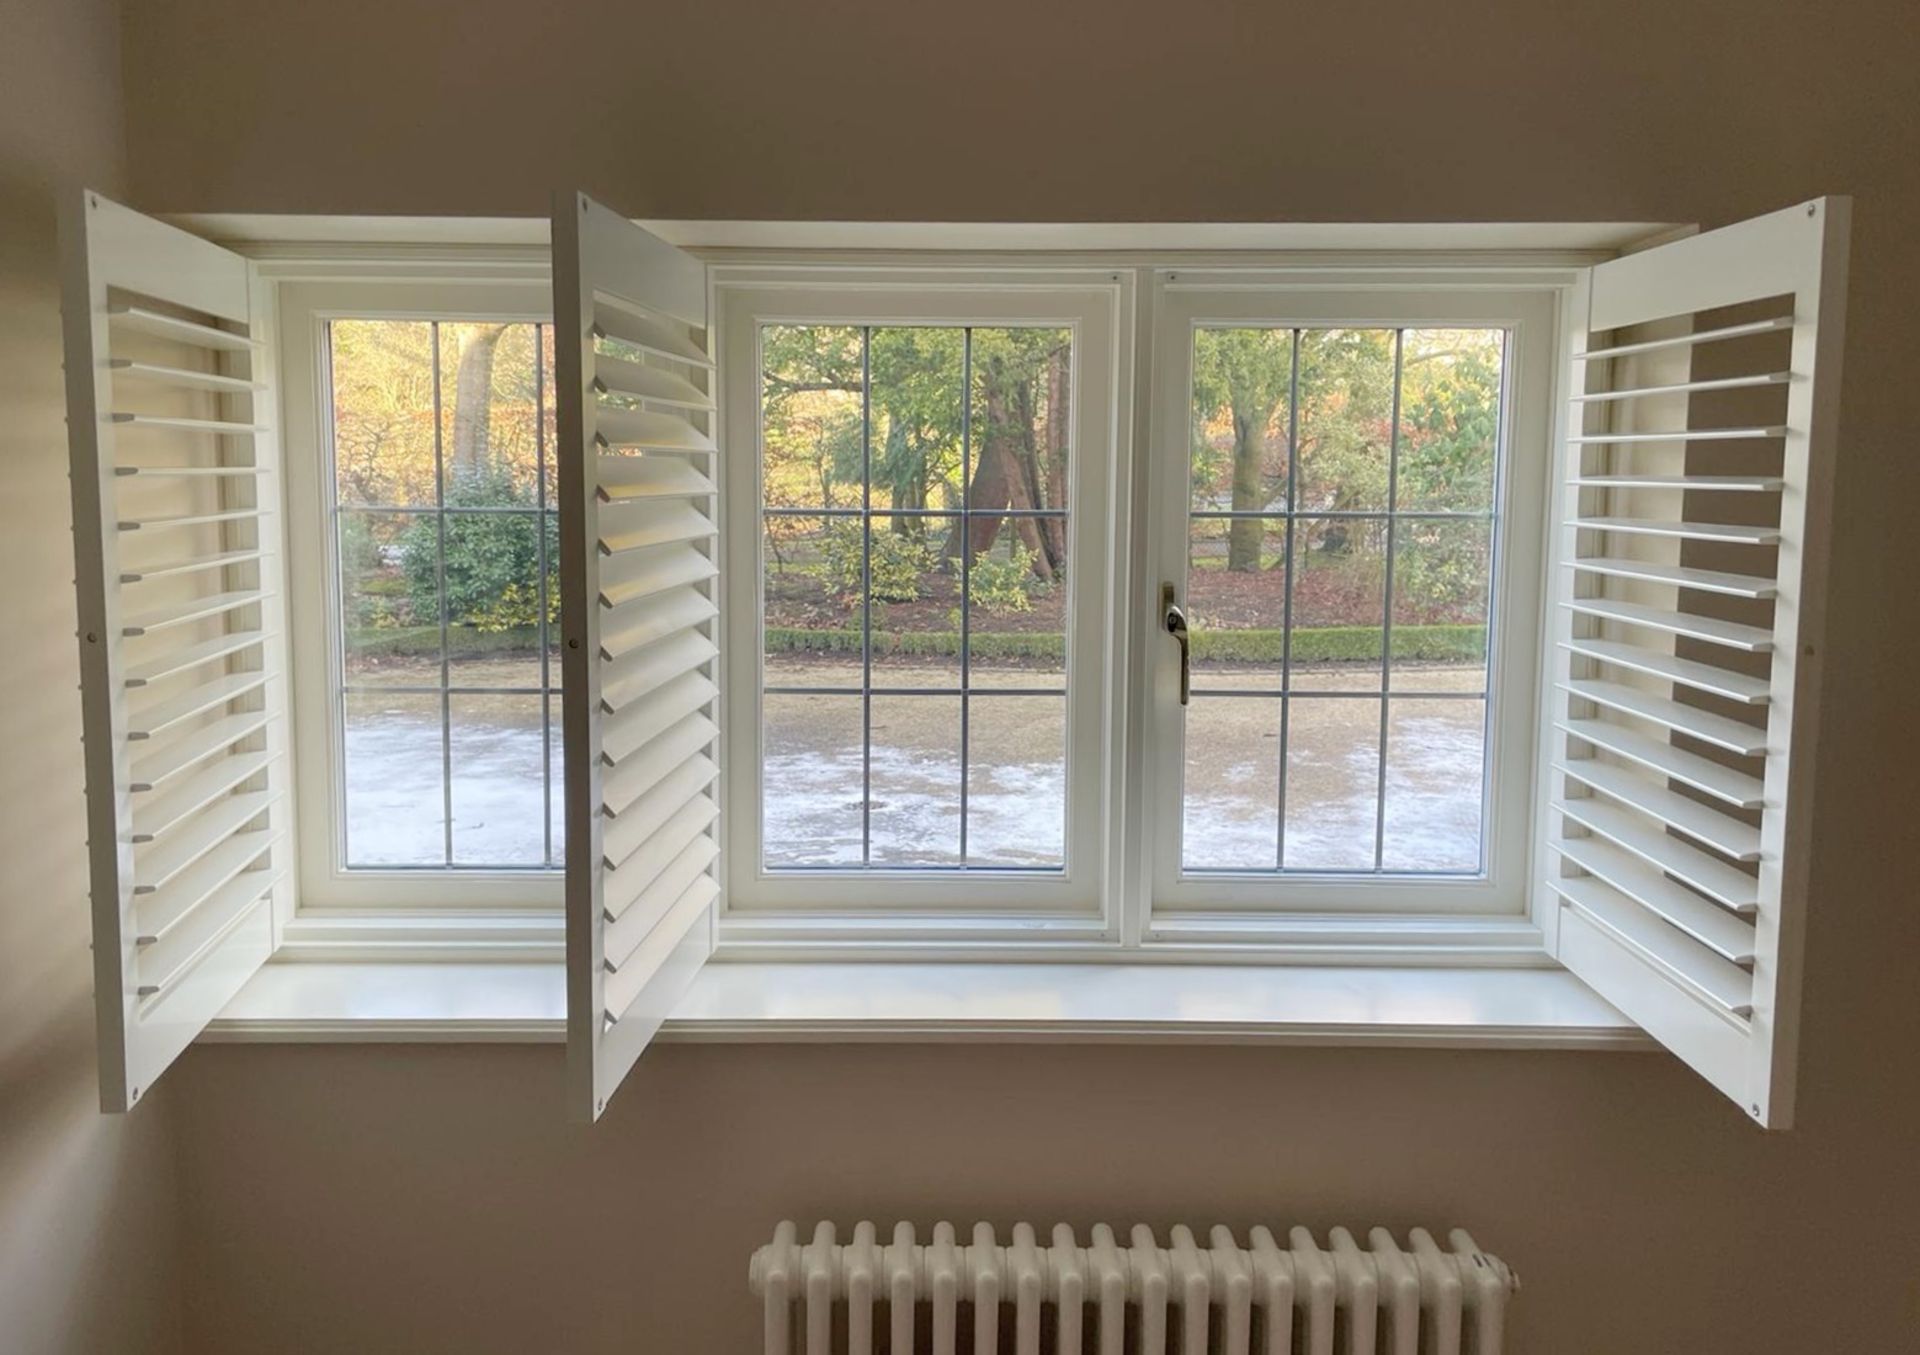 1 x Hardwood Timber Double Glazed Leaded 3-Pane Window Frame fitted with Shutter Blinds - Image 10 of 15